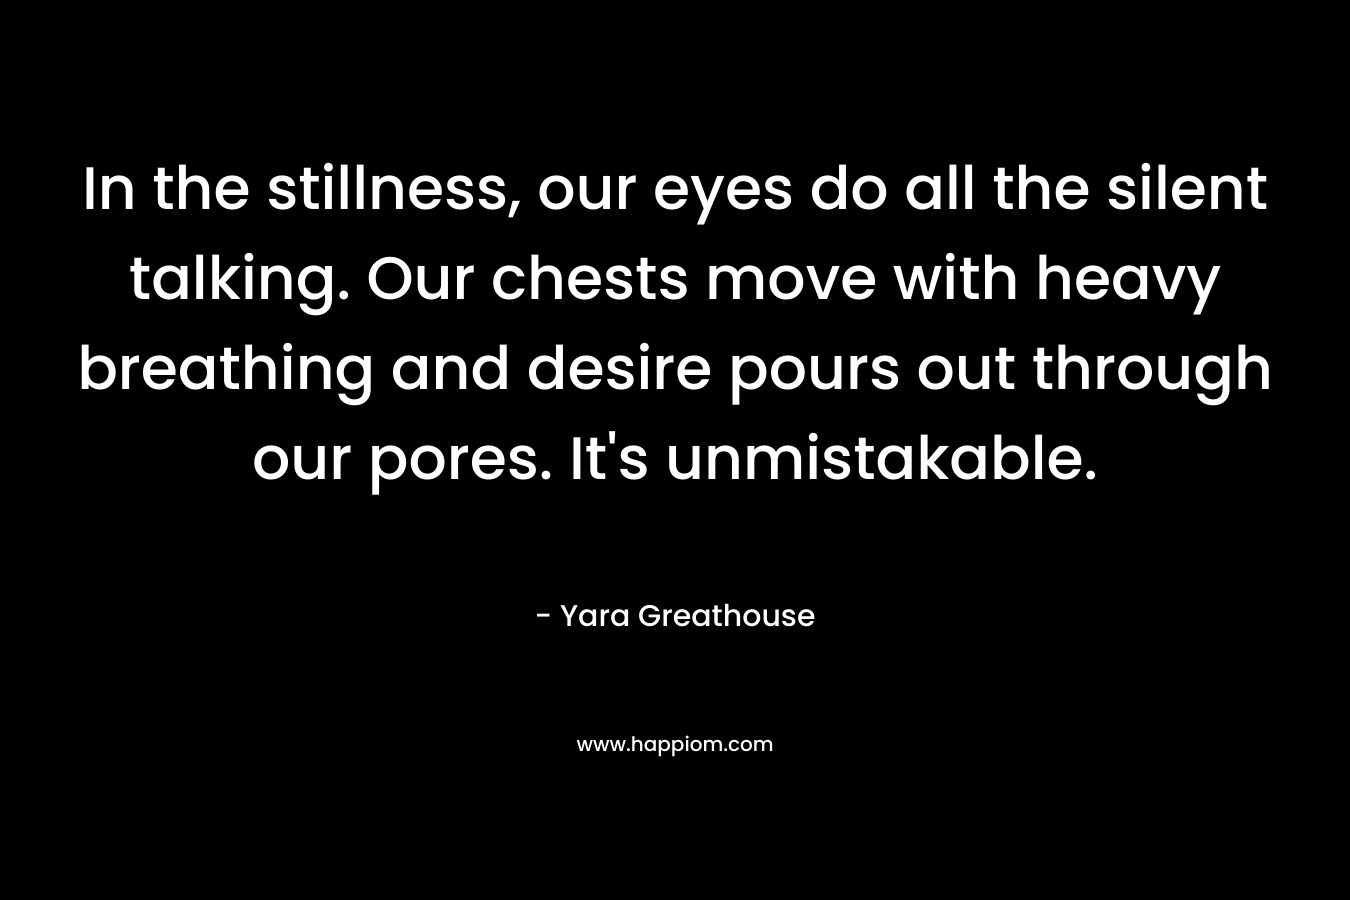 In the stillness, our eyes do all the silent talking. Our chests move with heavy breathing and desire pours out through our pores. It’s unmistakable. – Yara Greathouse